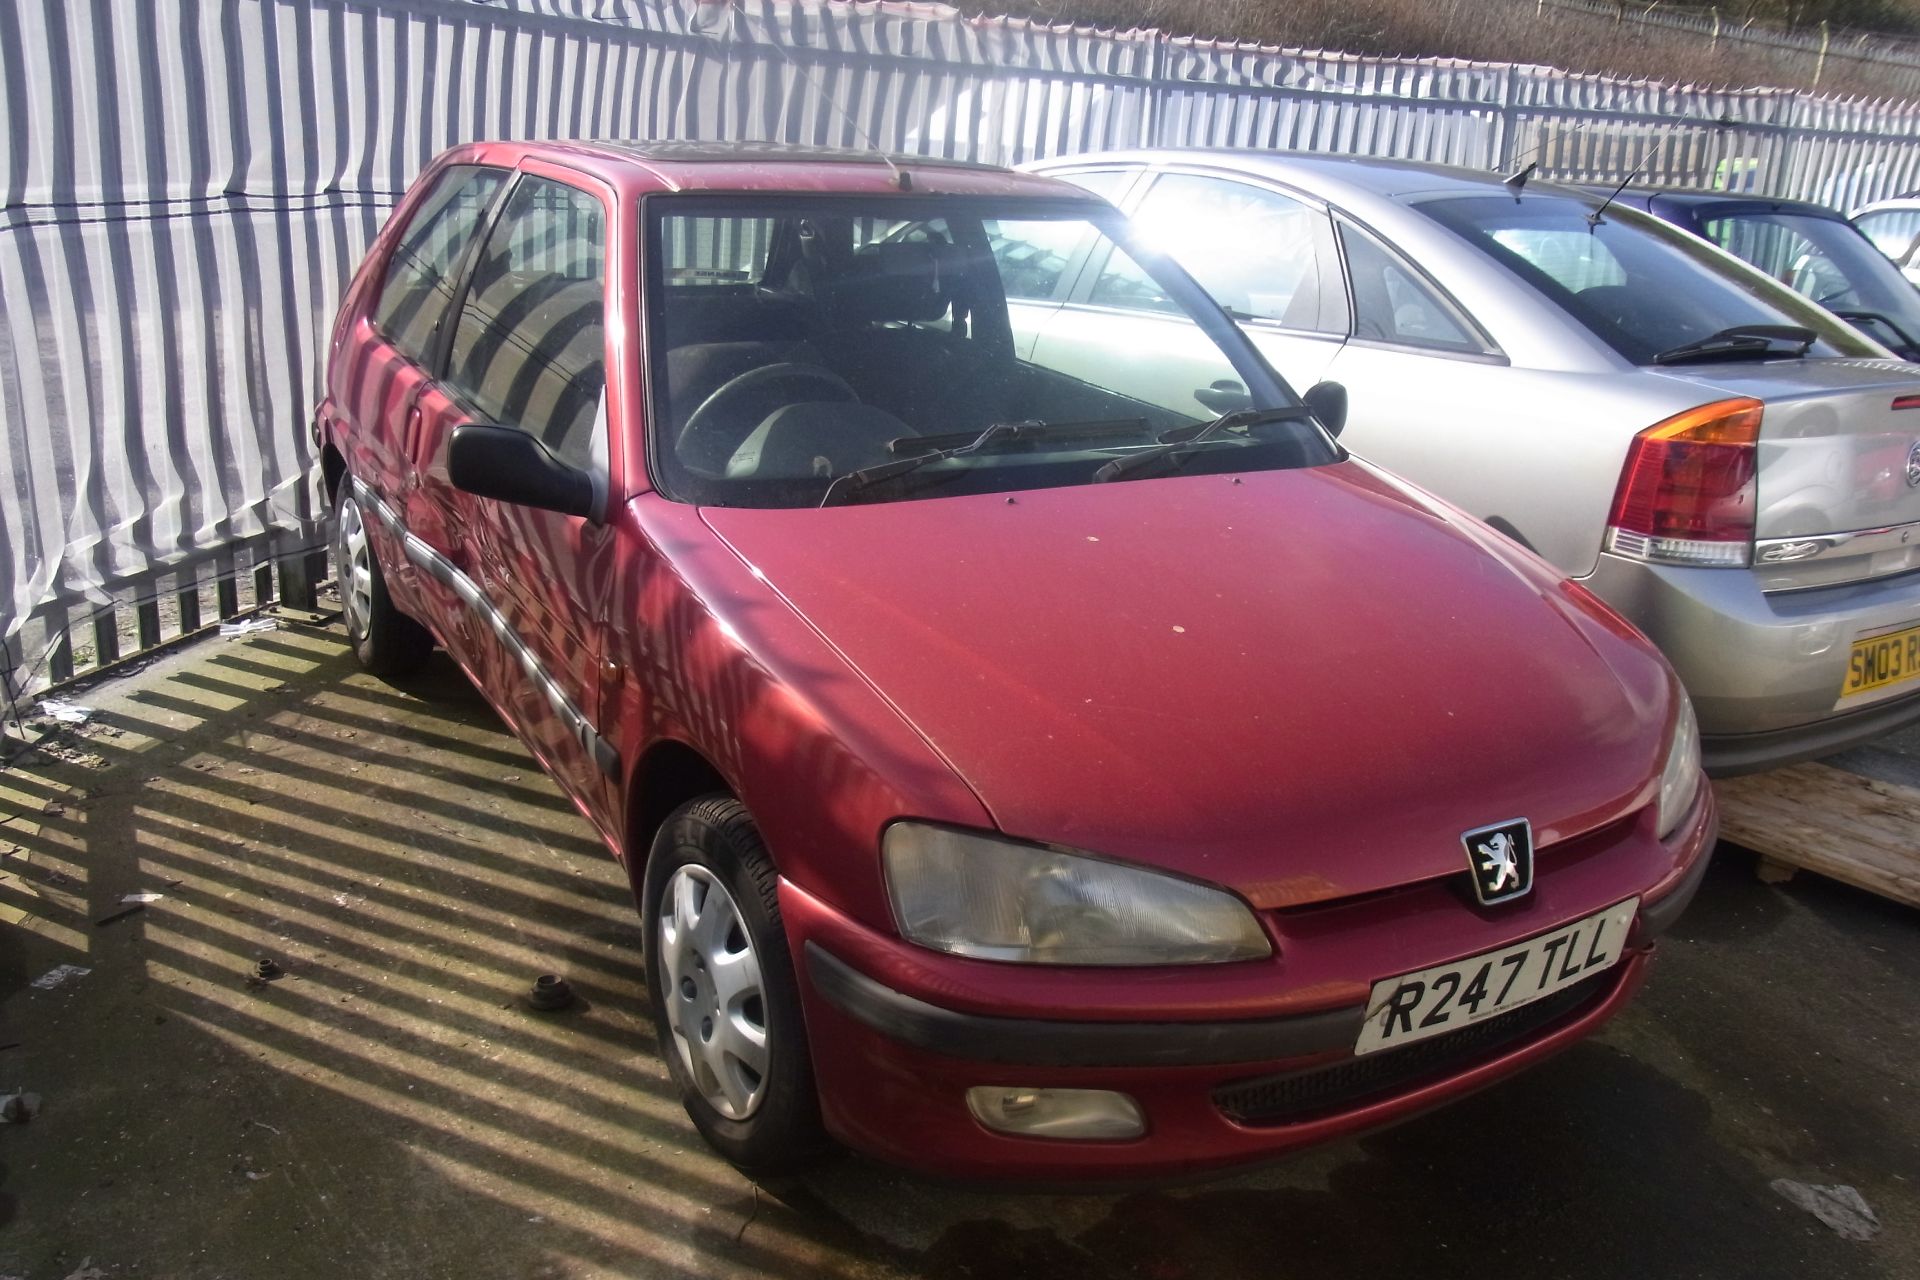 R247 TLL - Peugeot 106 XL Independence - Image 2 of 2